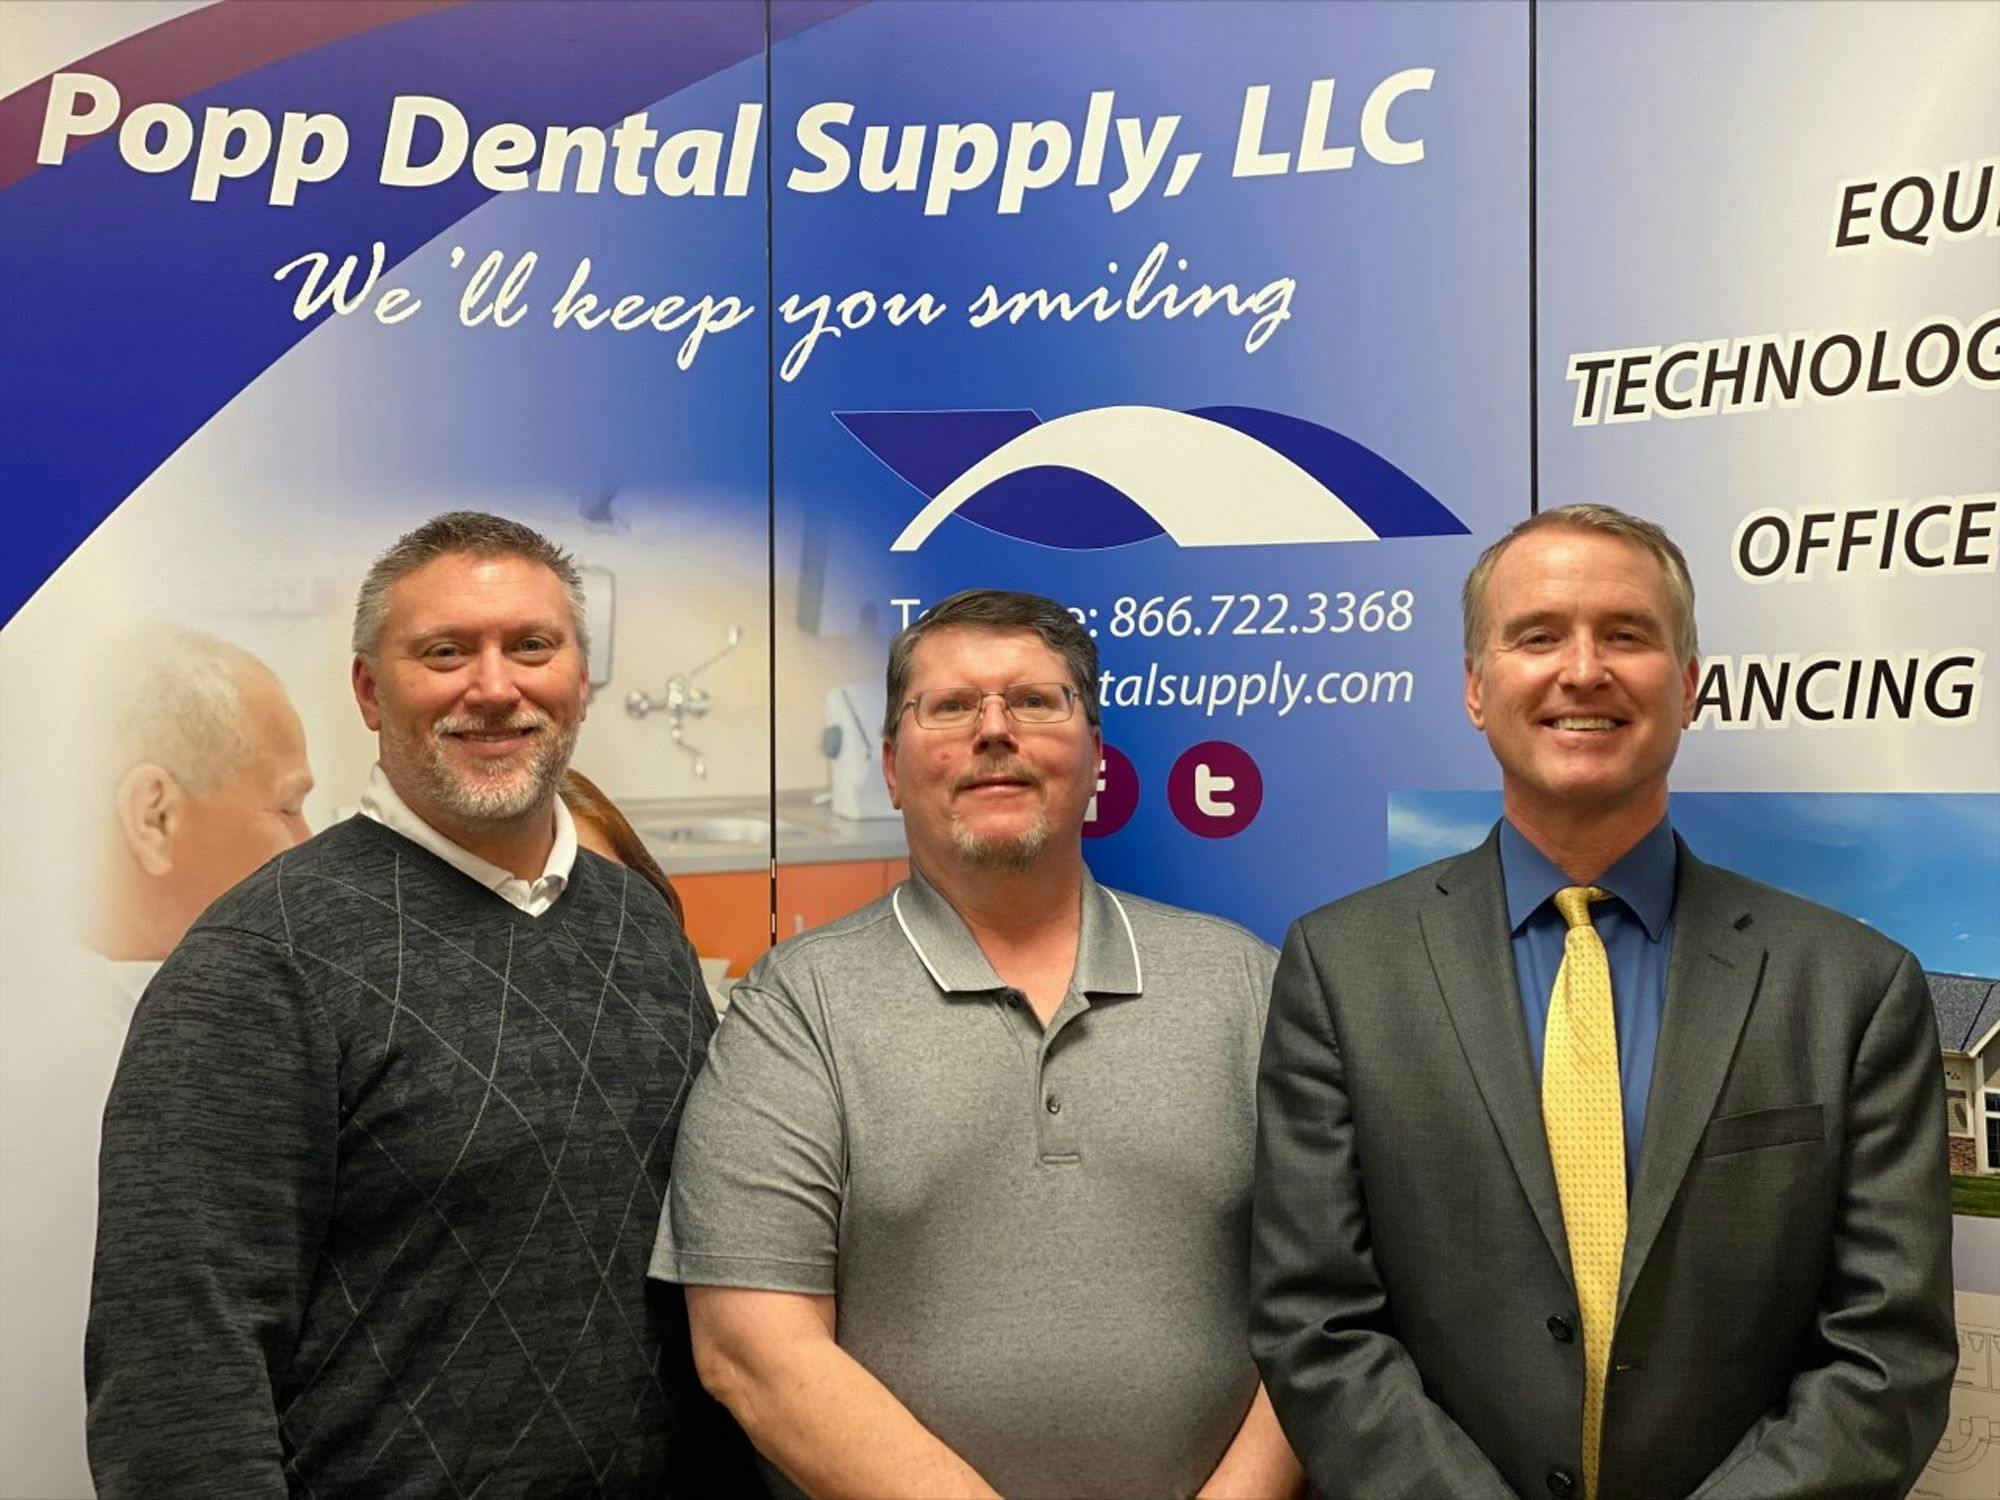 Popp Dental Supply owners, from left, Tim Nielson, President, Dave Kelsay,  General Manager and John Przybyla, Outside Sales. Absent from photo: James Brown. Benco Dental Acquires Popp Dental Supply. 